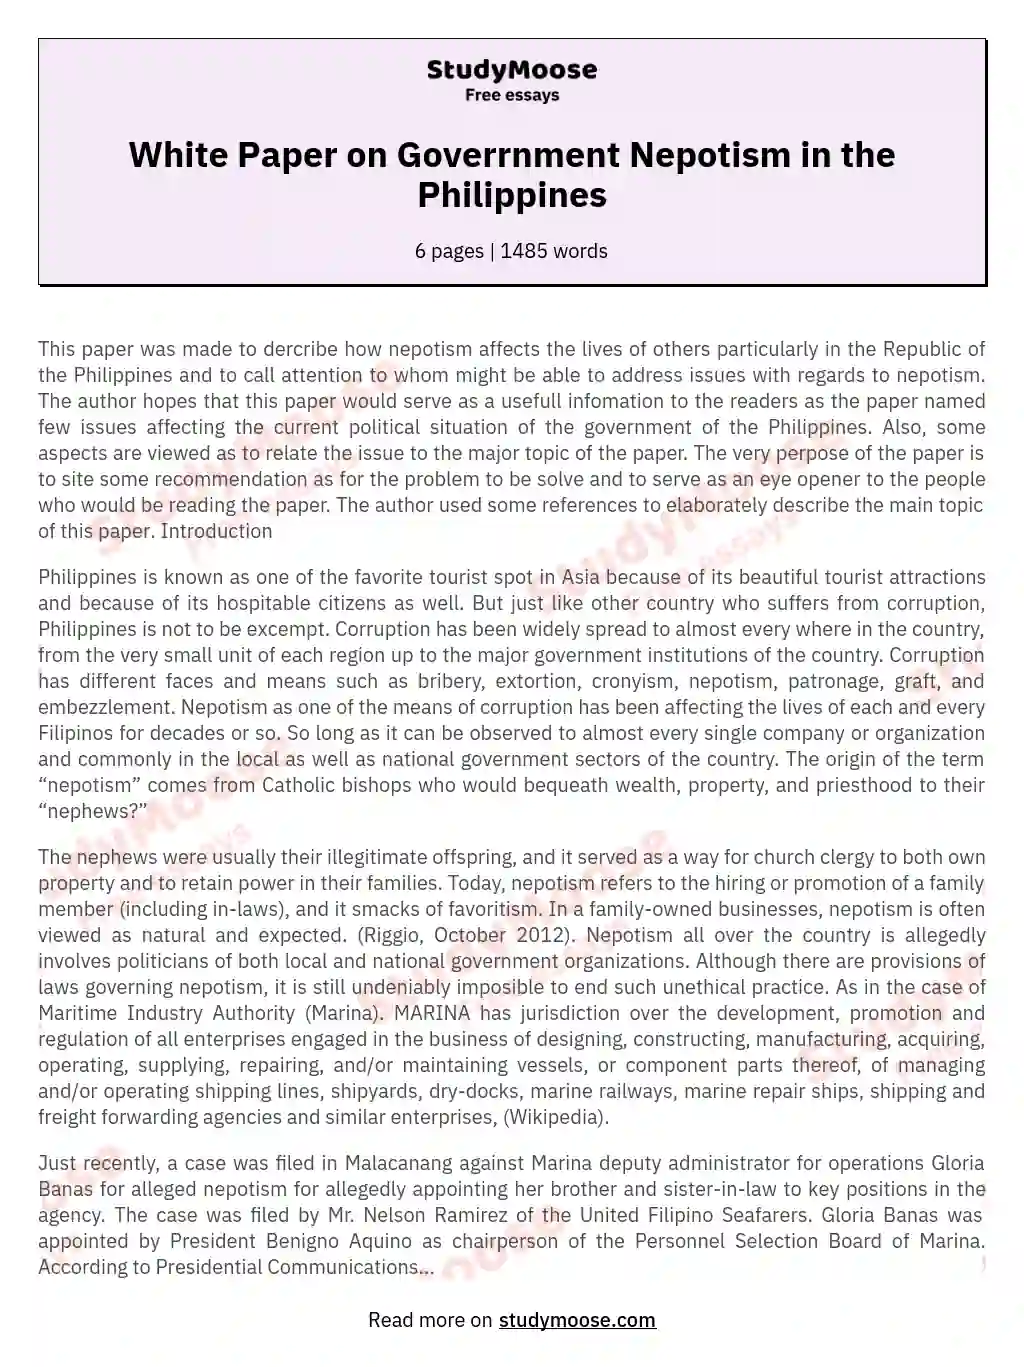 White Paper on Goverrnment Nepotism in the Philippines essay